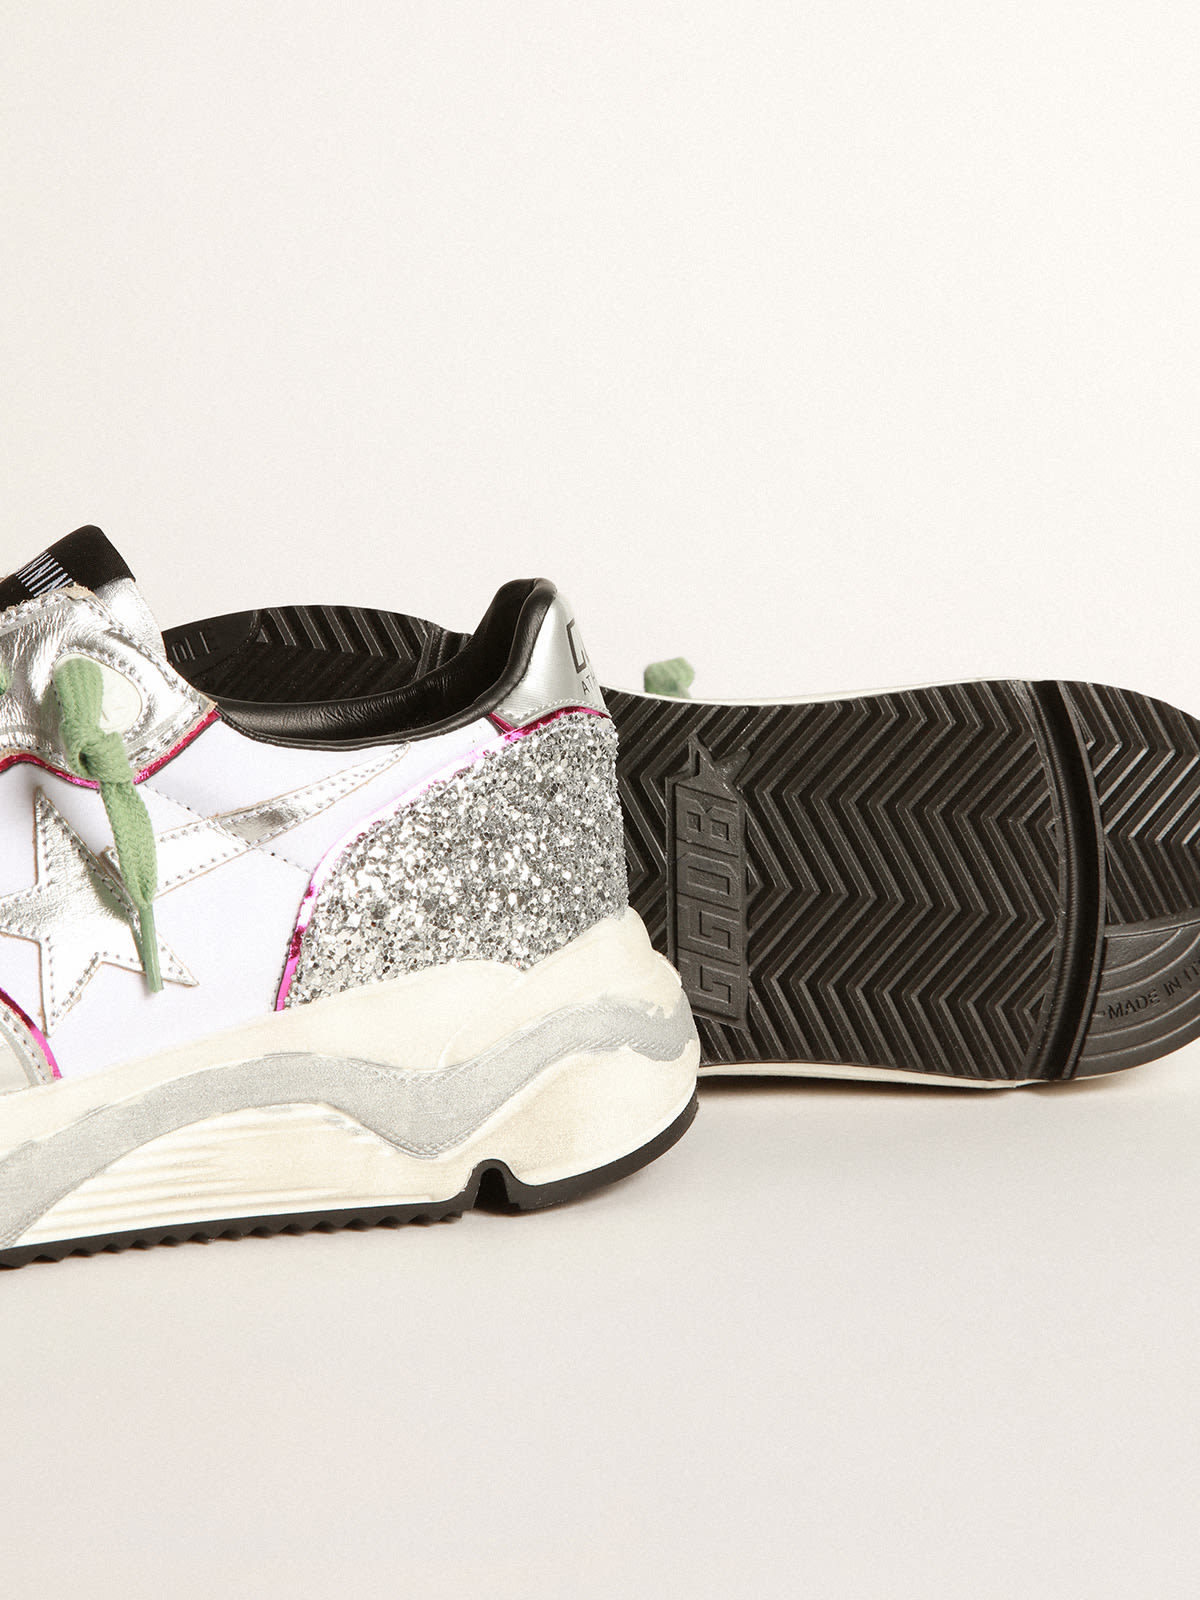 Golden Goose - Silver Running Sole sneakers with glitter and fuchsia edging in 